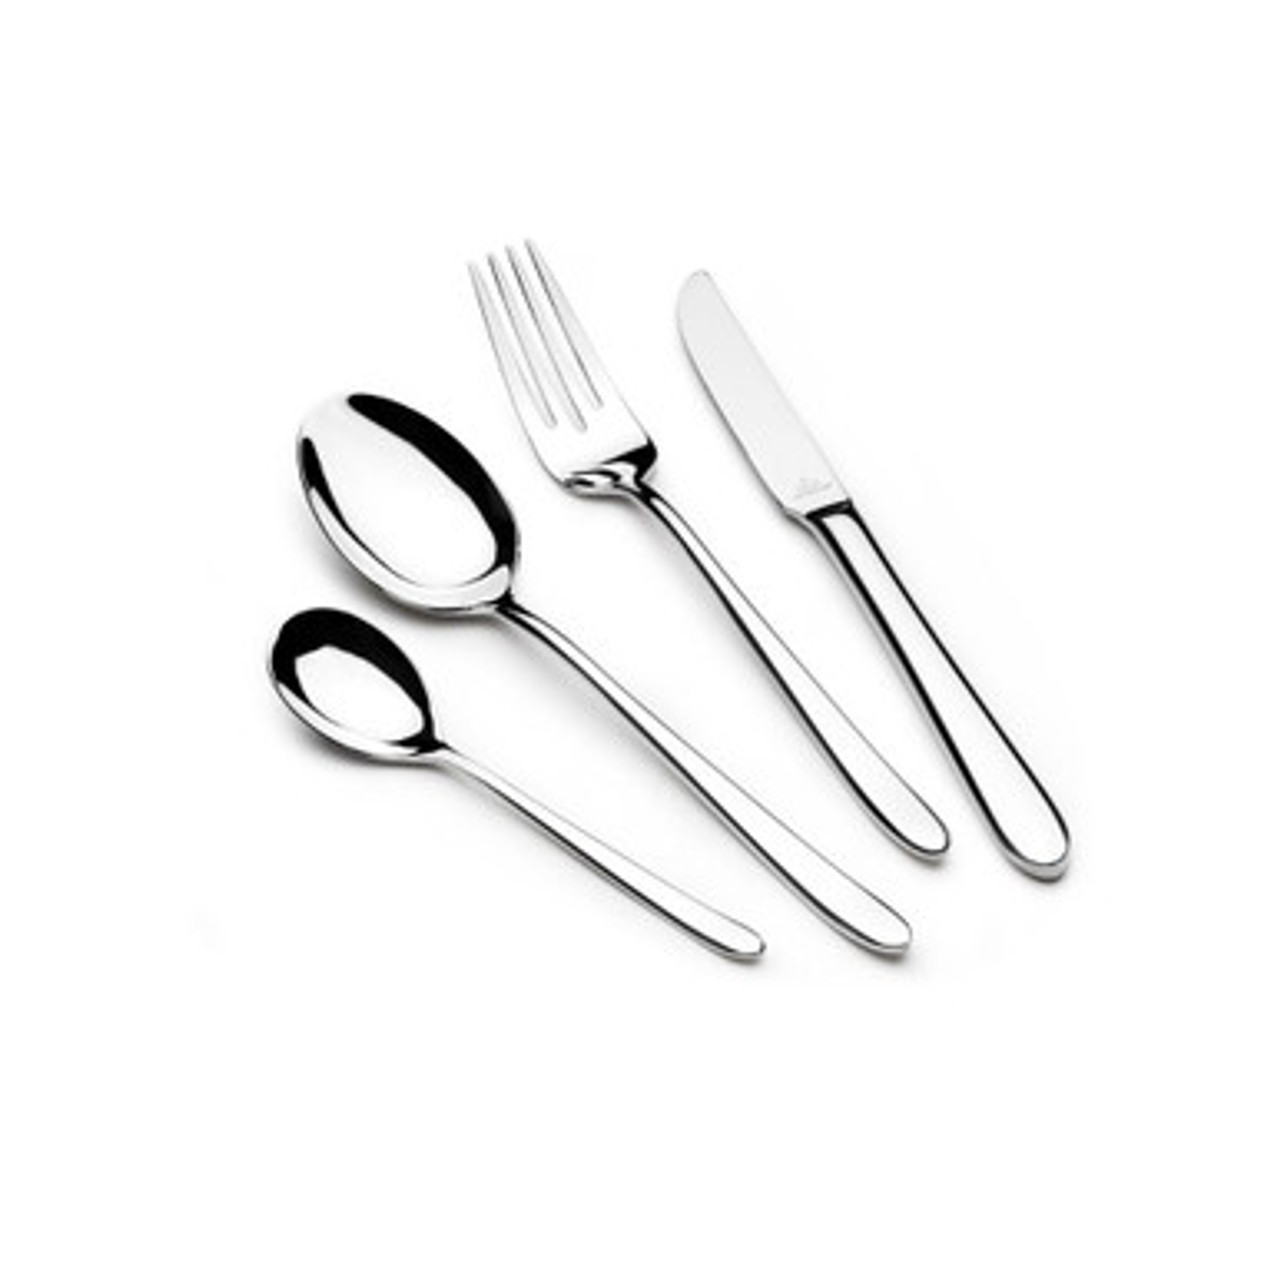 Arshia stainless steel Cutlery Sets 38pcs TM1401S